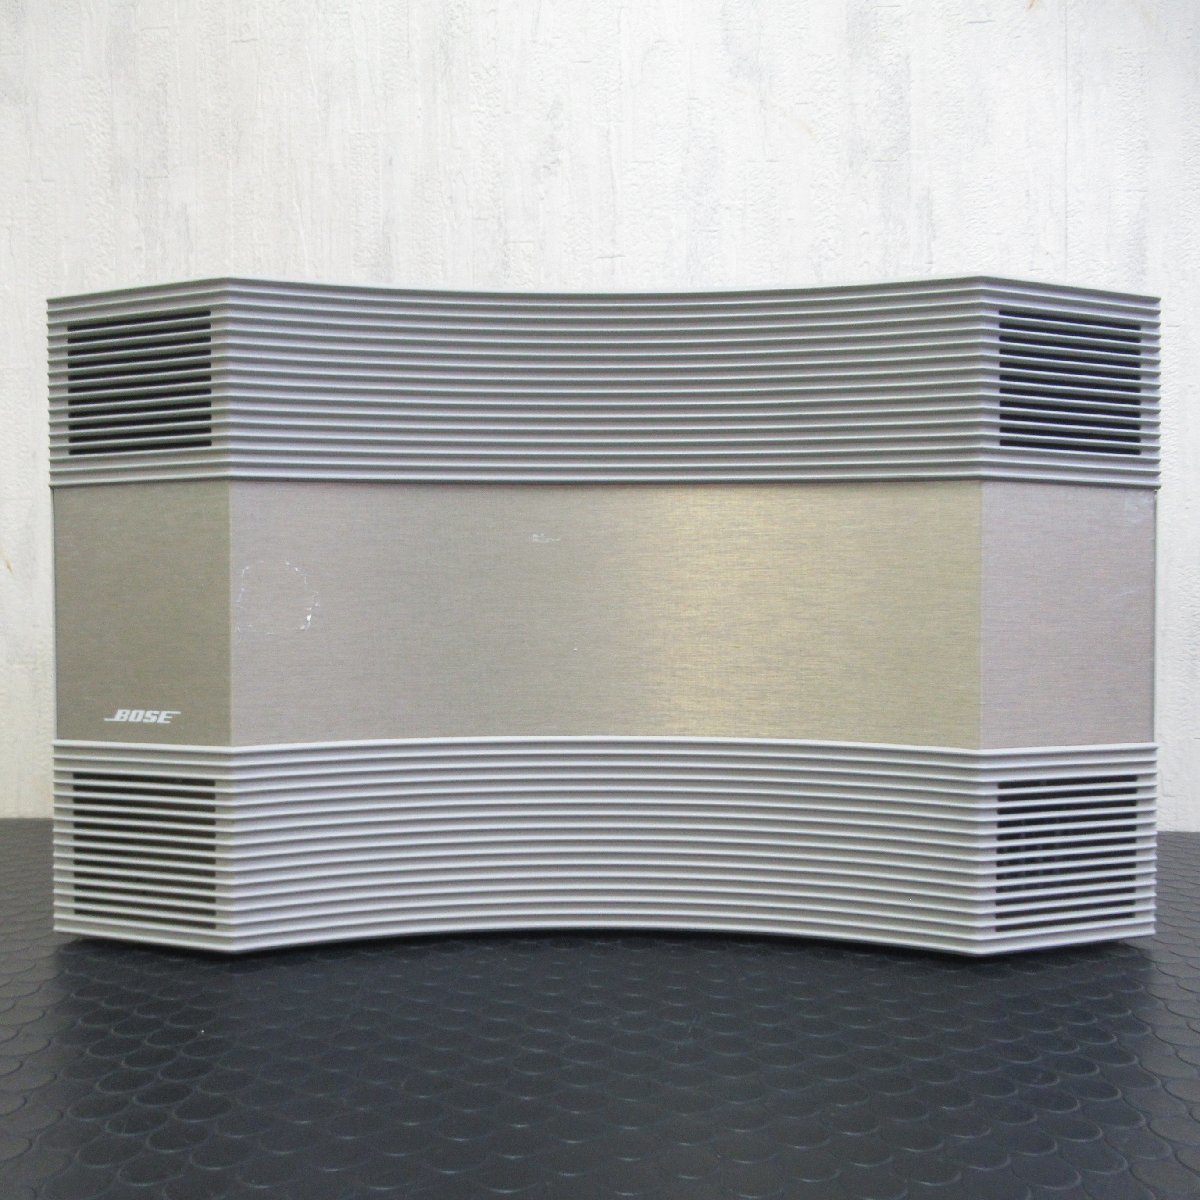 BOSE（ボーズ）Acoustic Wave stereo music system ラジカセ AW-1【 中古品 】（No.2）_画像2